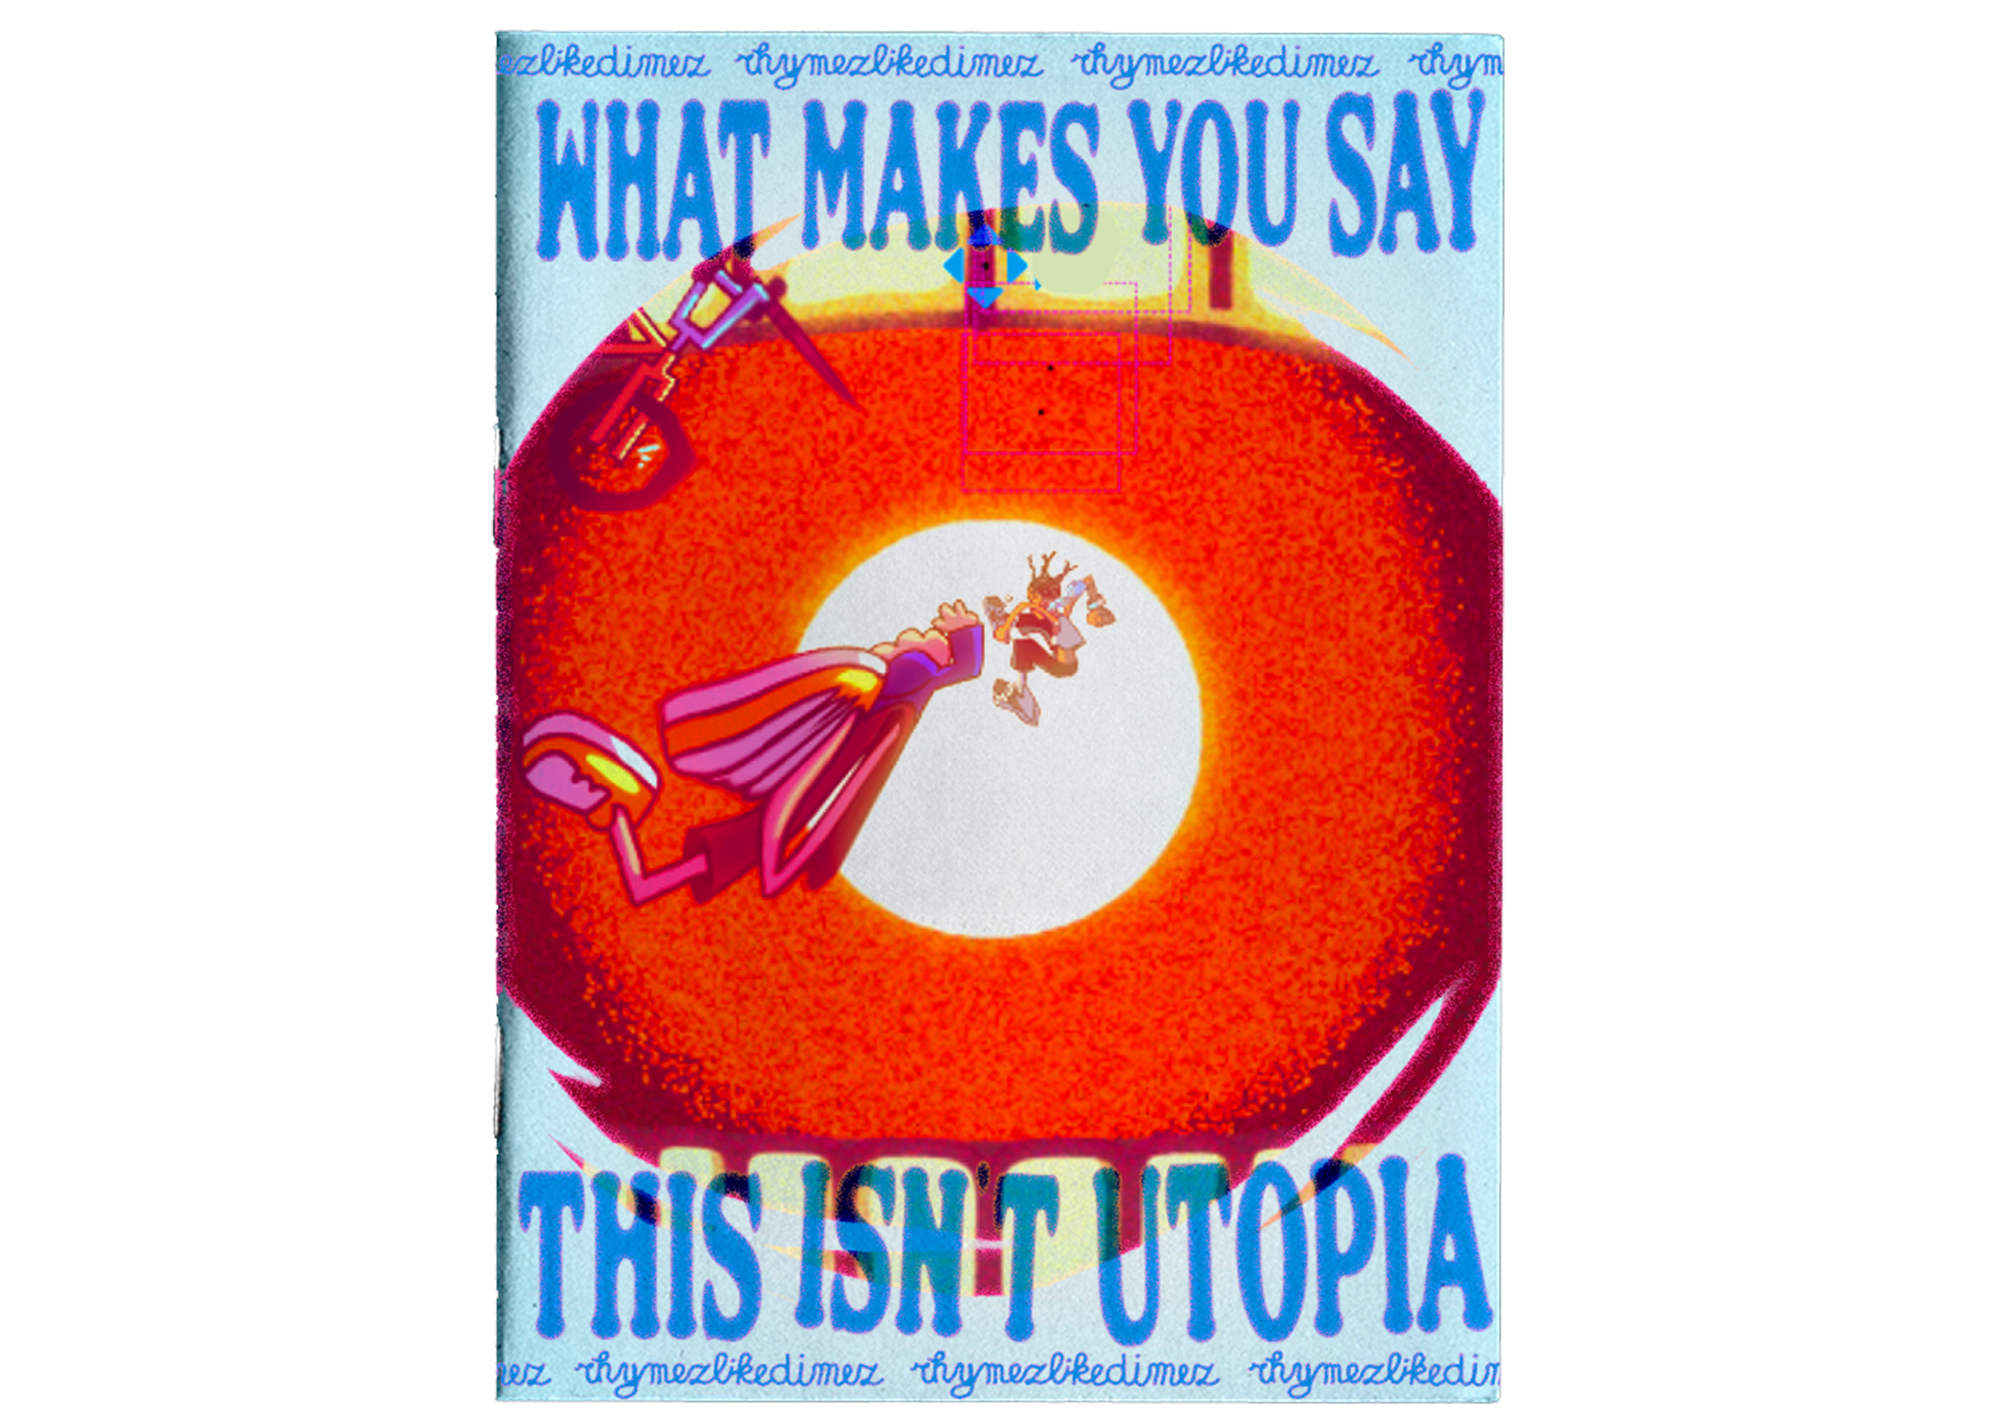 Zine "What Makes You Say This Isn't Utopia"